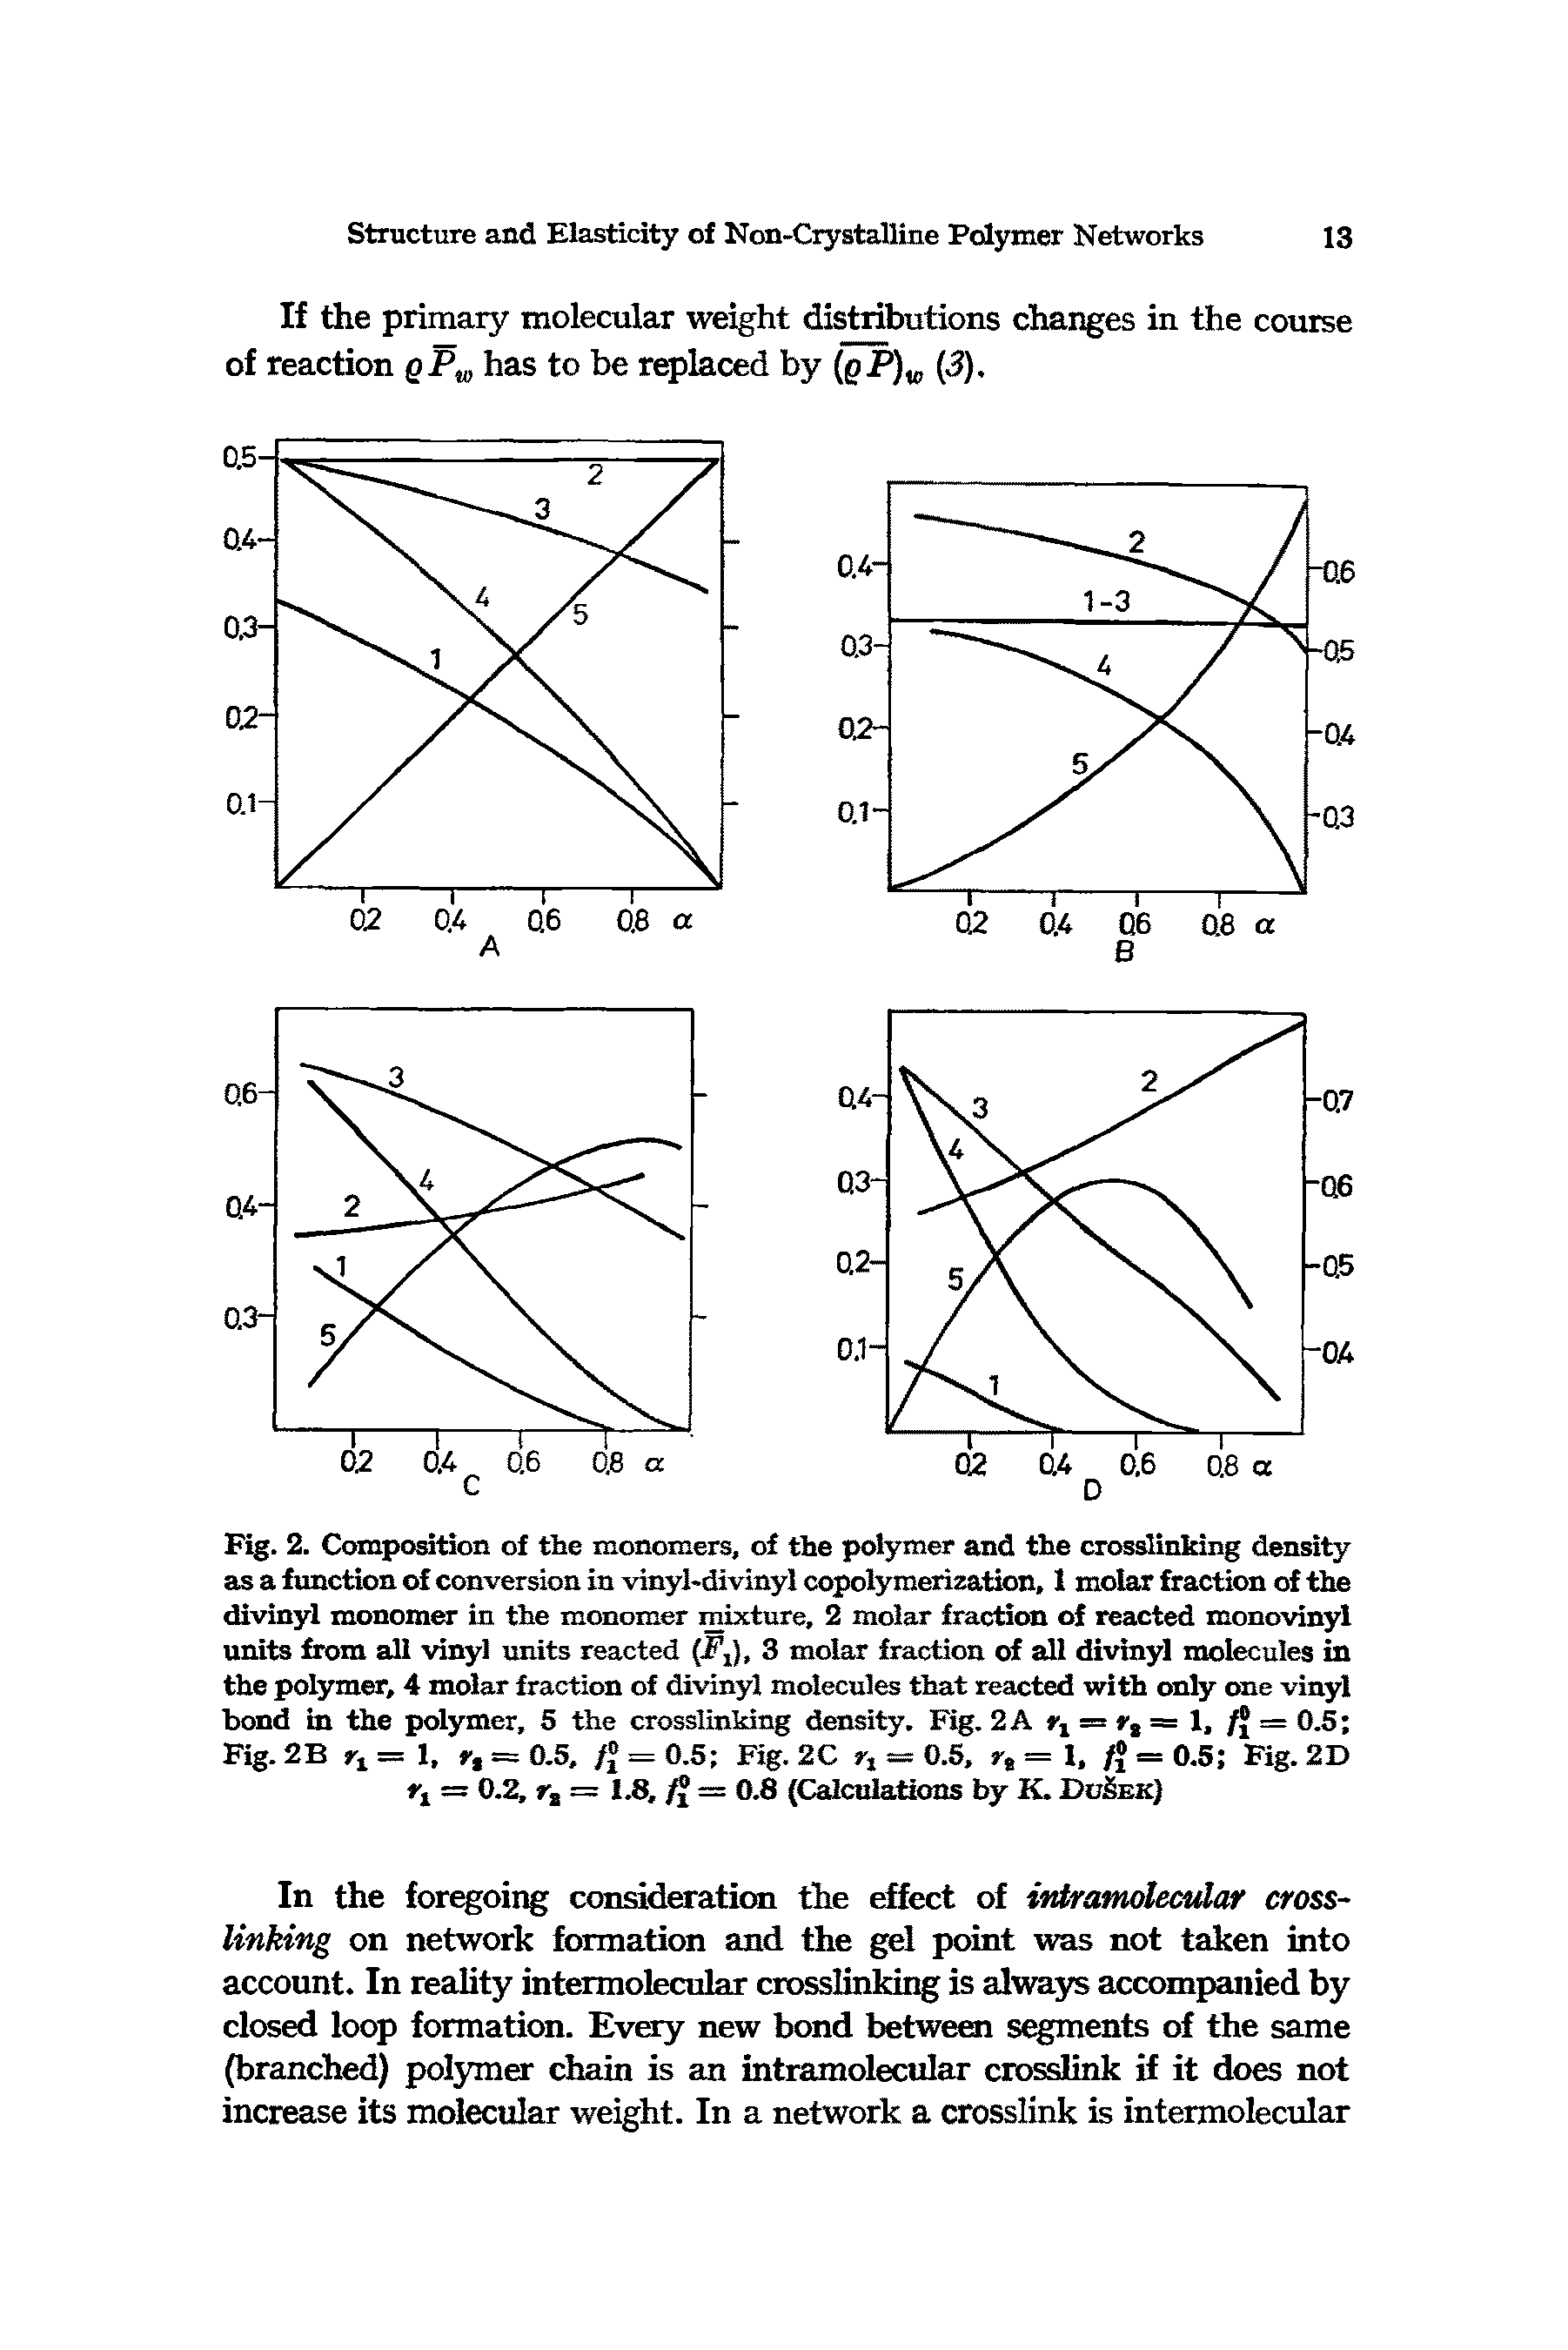 Fig. 2. Composition of the monomers, of the polymer and the crosslinking density as a function of conversion in vinyl-divinyl copolymerization, 1 molar fraction of the divinyl monomer in the monomer mixture, 2 molar fraction of reacted monovinyl units from all vinyl units reacted (J,), 3 molar fraction of all divinyl molecules in the polymer, 4 molar fraction of divinyl molecules that reacted with only one vinyl bond in the polymer, 5 the crosslinking density. Fig. 2 A = rt = 1, f = 0.5 Fig. 2B rt =1, r, = 0.5, / = 0.5 Fig. 2C r, = 0.5, r, = 1, / = 0.5 Fig. 2D rt — 0.2, ra = 1.8, /f = 0.8 (Calculations by K. DcSek)...